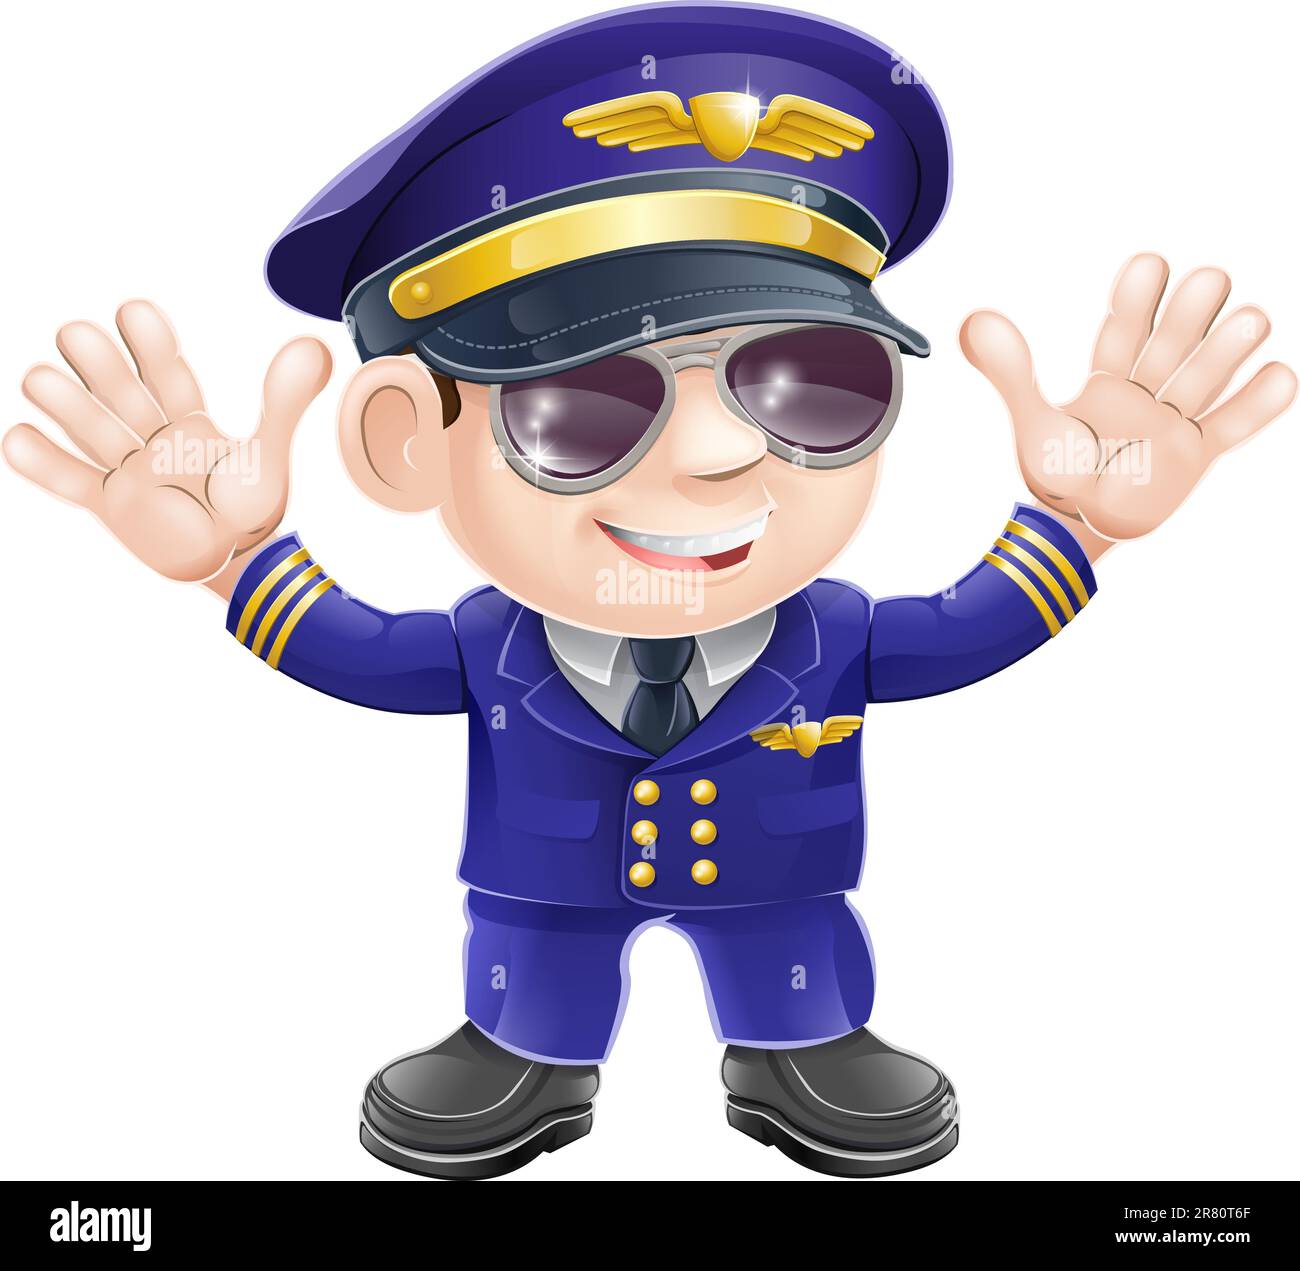 Illustration of a cute happy airplane pilot wearing sunglasses and waving Stock Vector